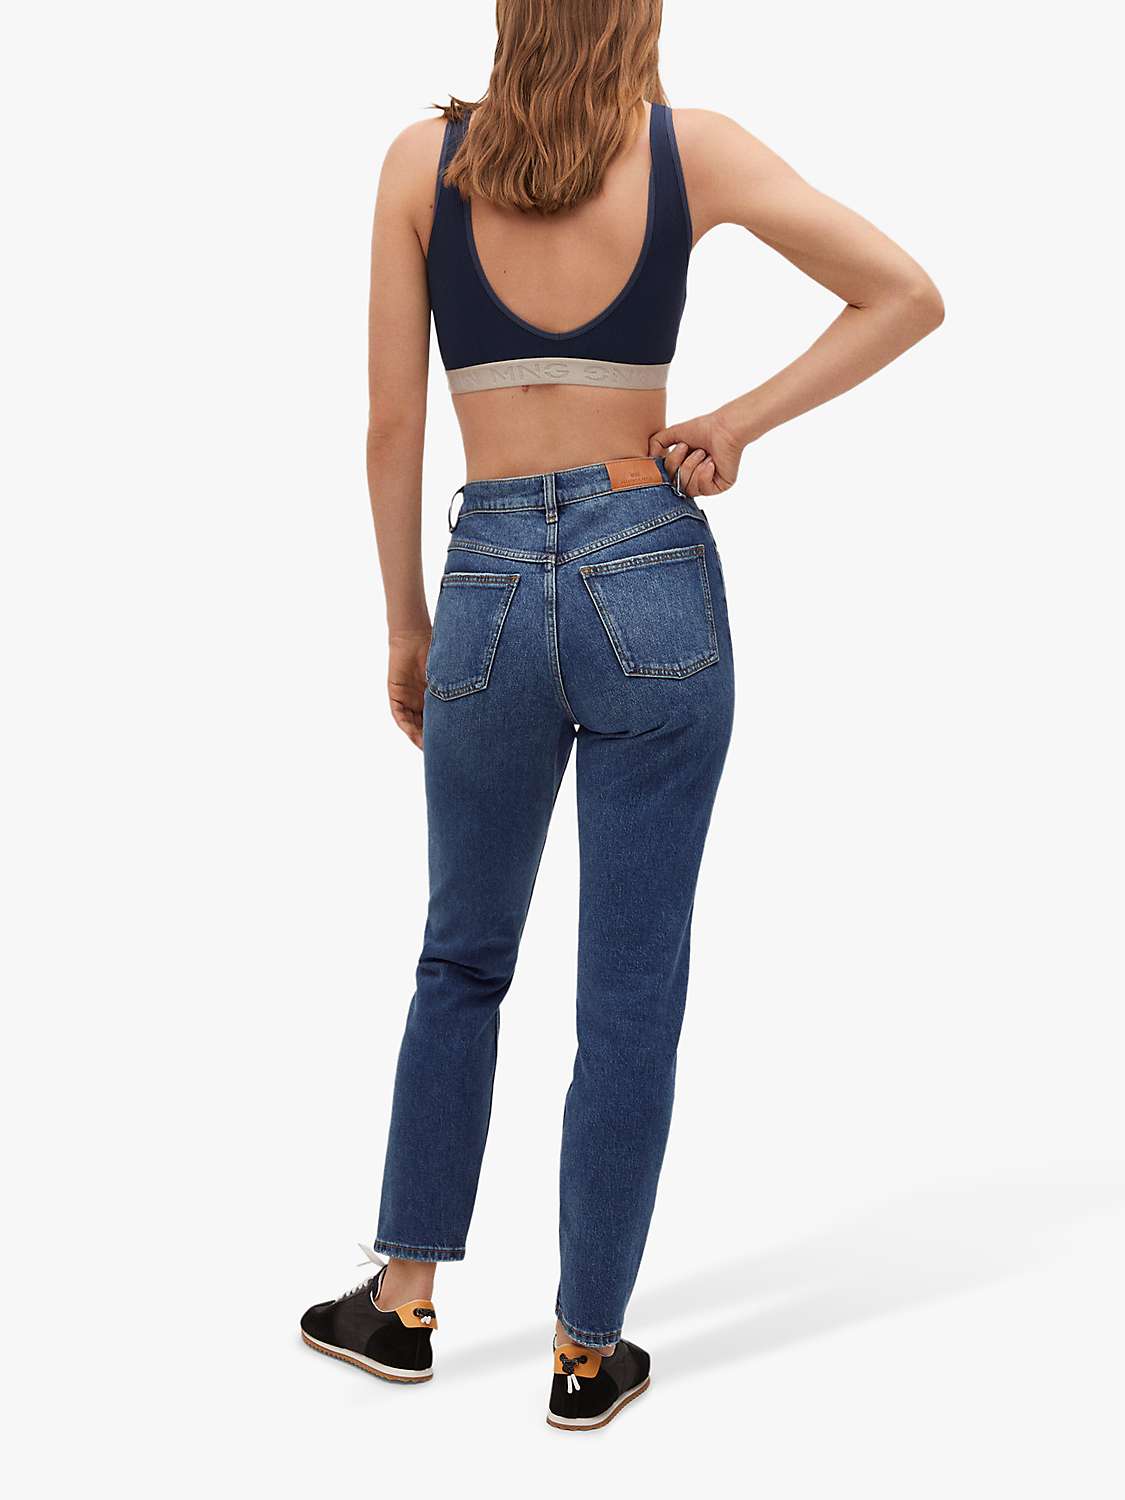 Buy Mango New Mom Fit High Waist Jeans Online at johnlewis.com